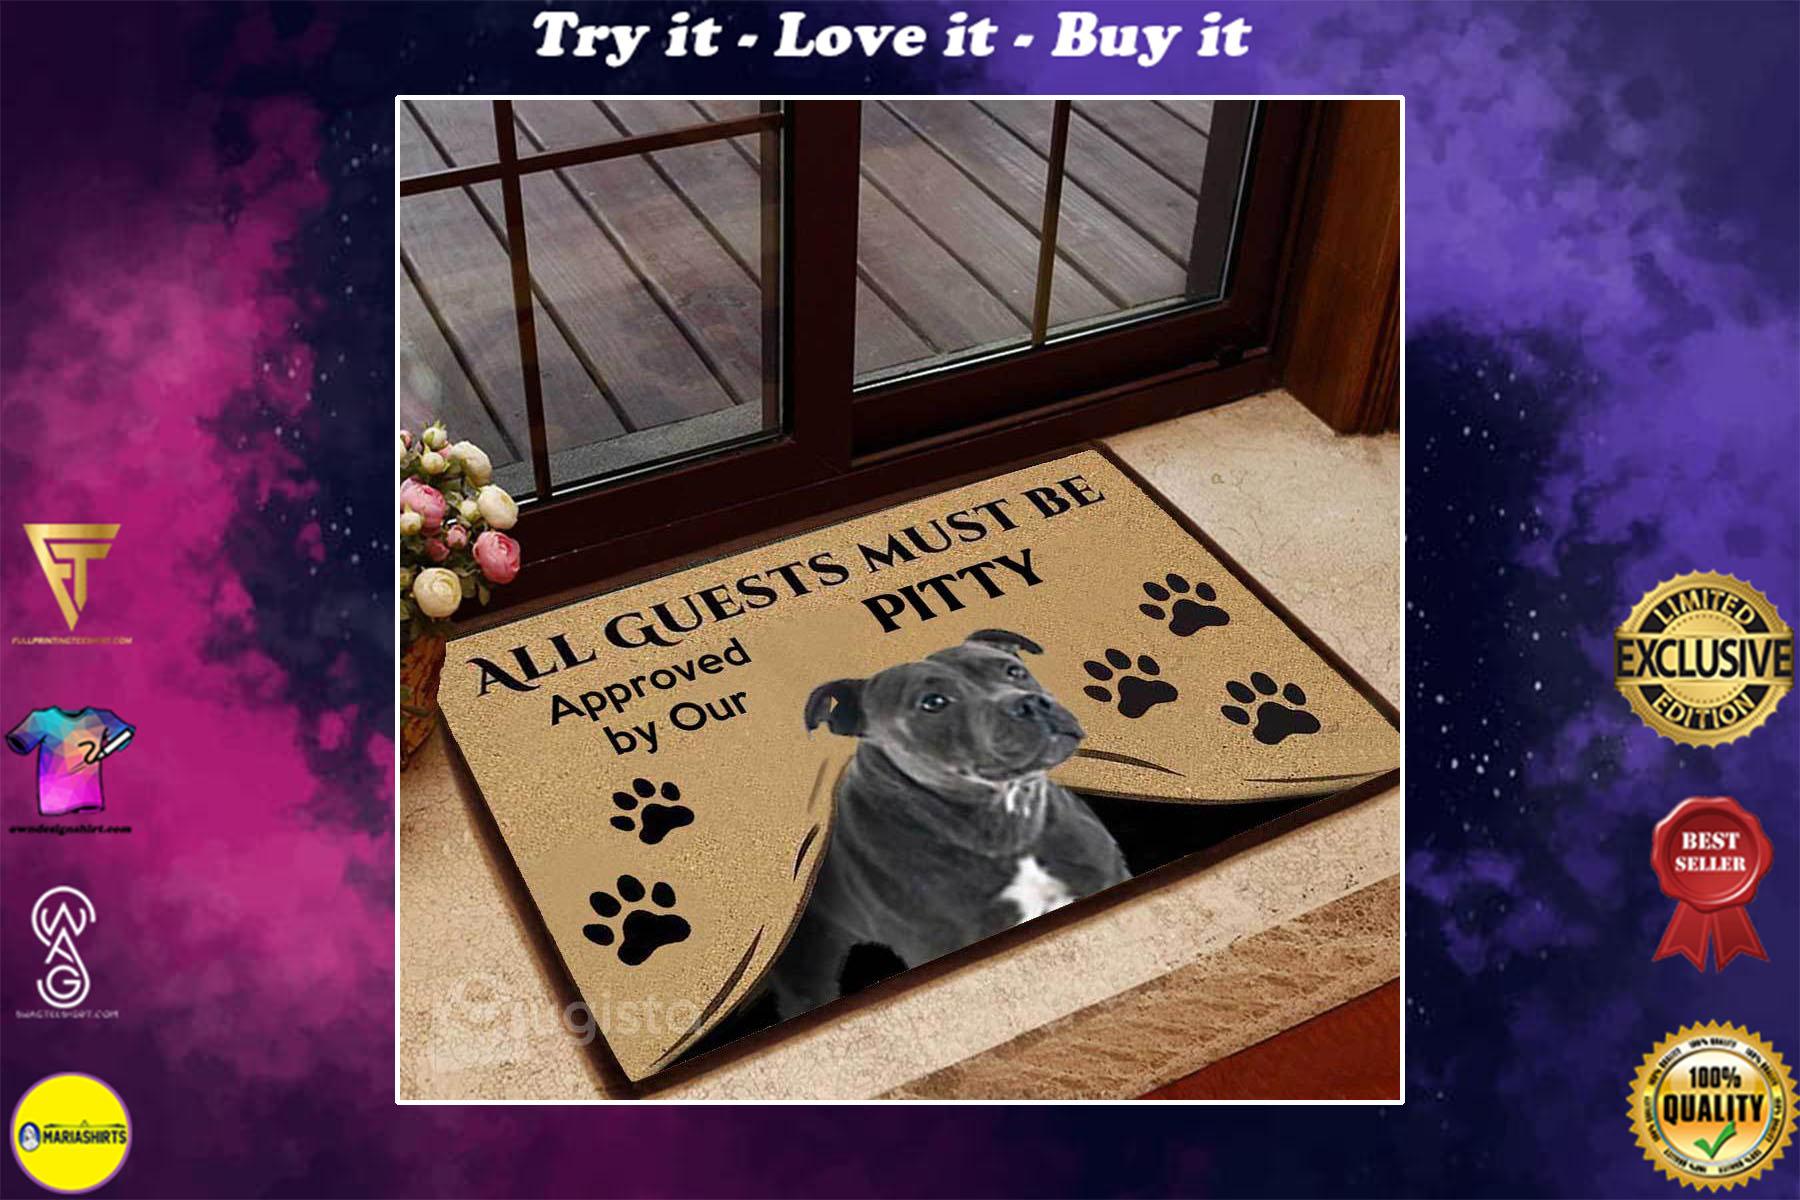 [special edition] all guests must be approved by our pitty doormat – maria